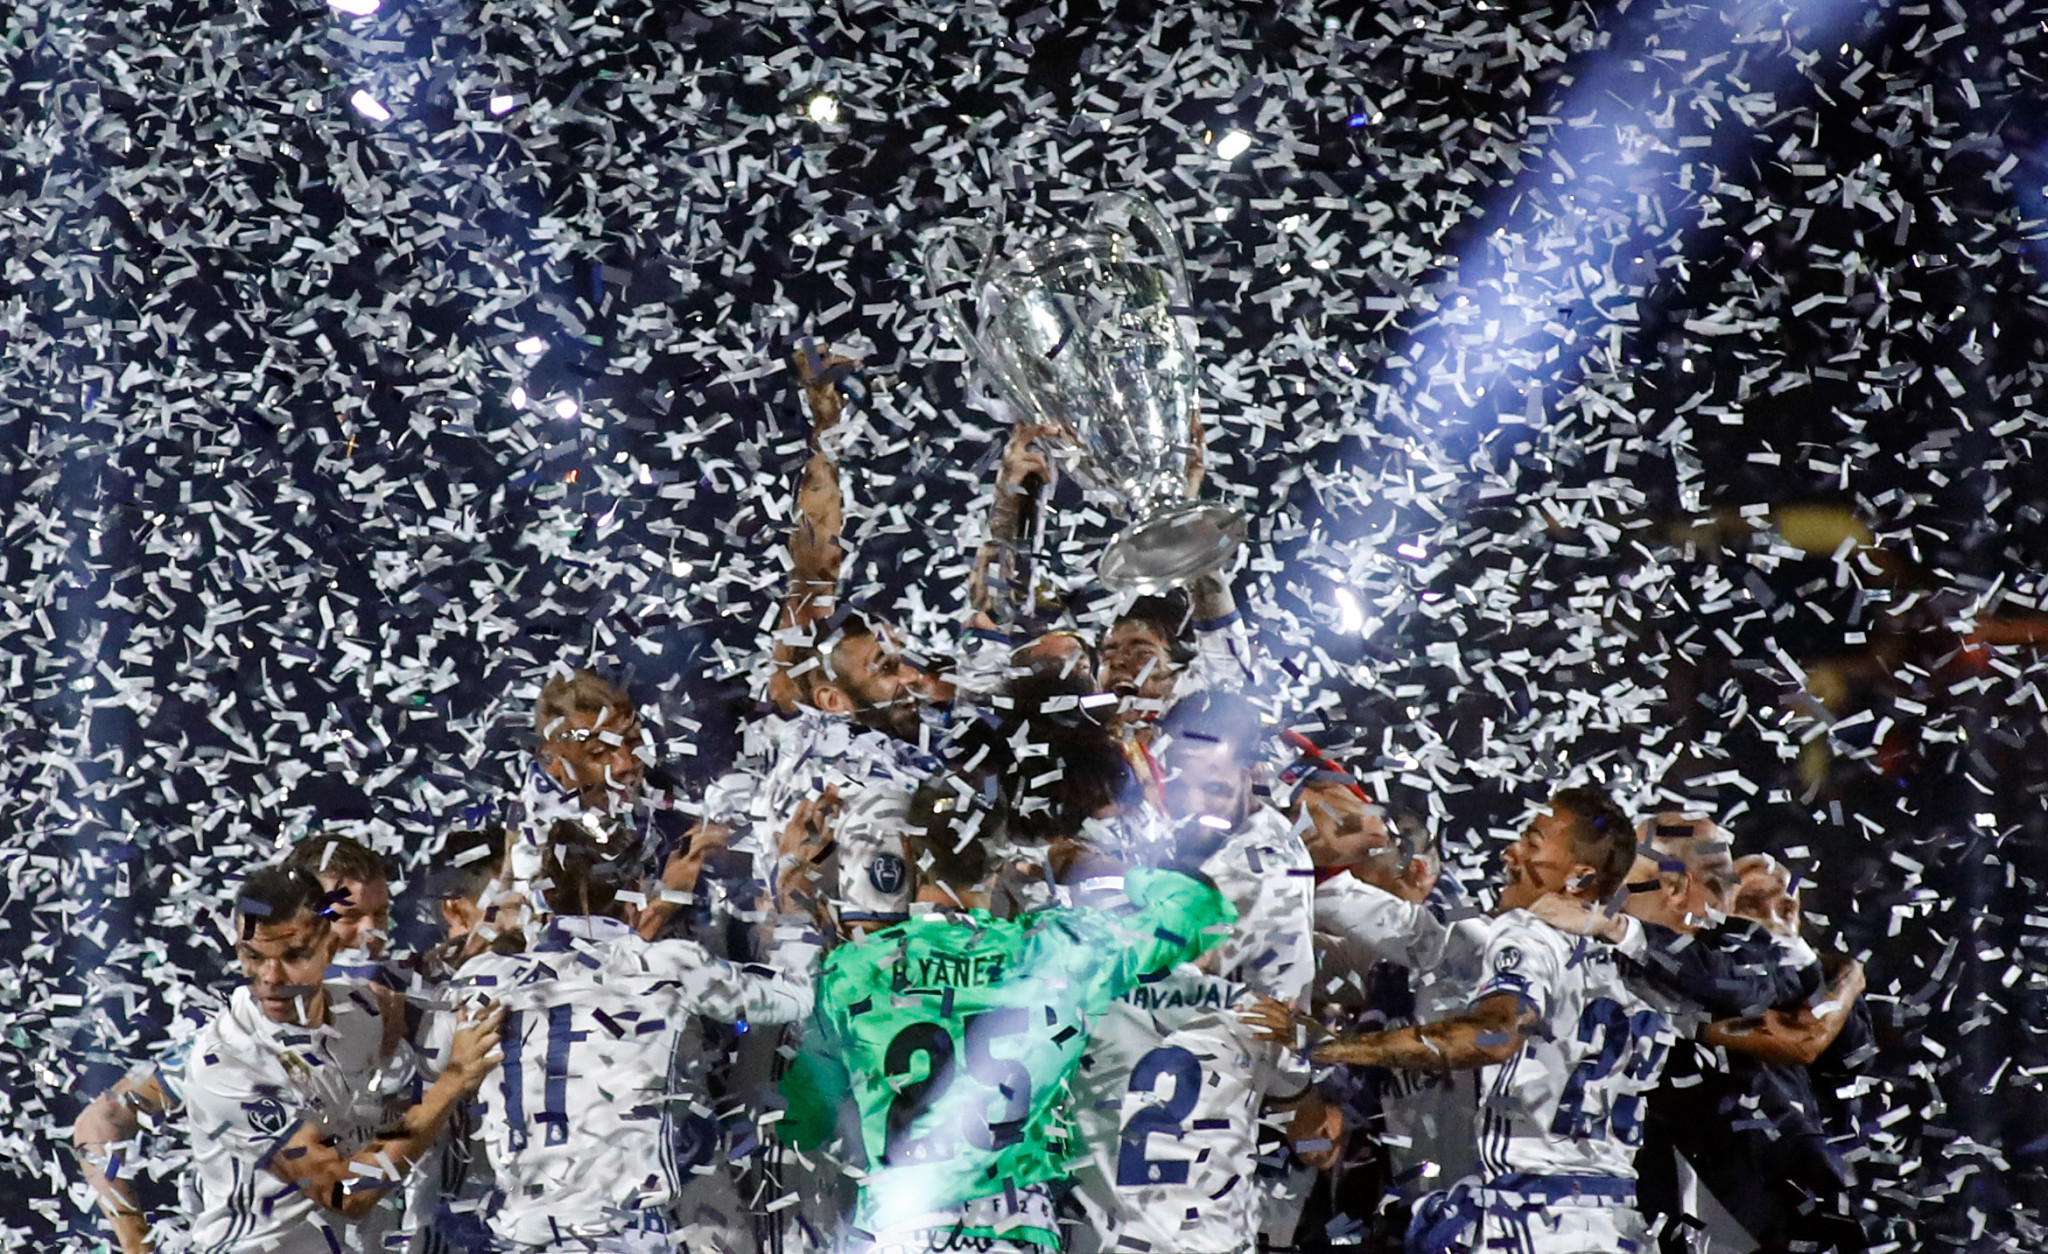 Financial fat cats Real Madrid celebrate their UEFA Champions League victory over Juventus at Cardiff's National Stadium in June. ©Getty Images